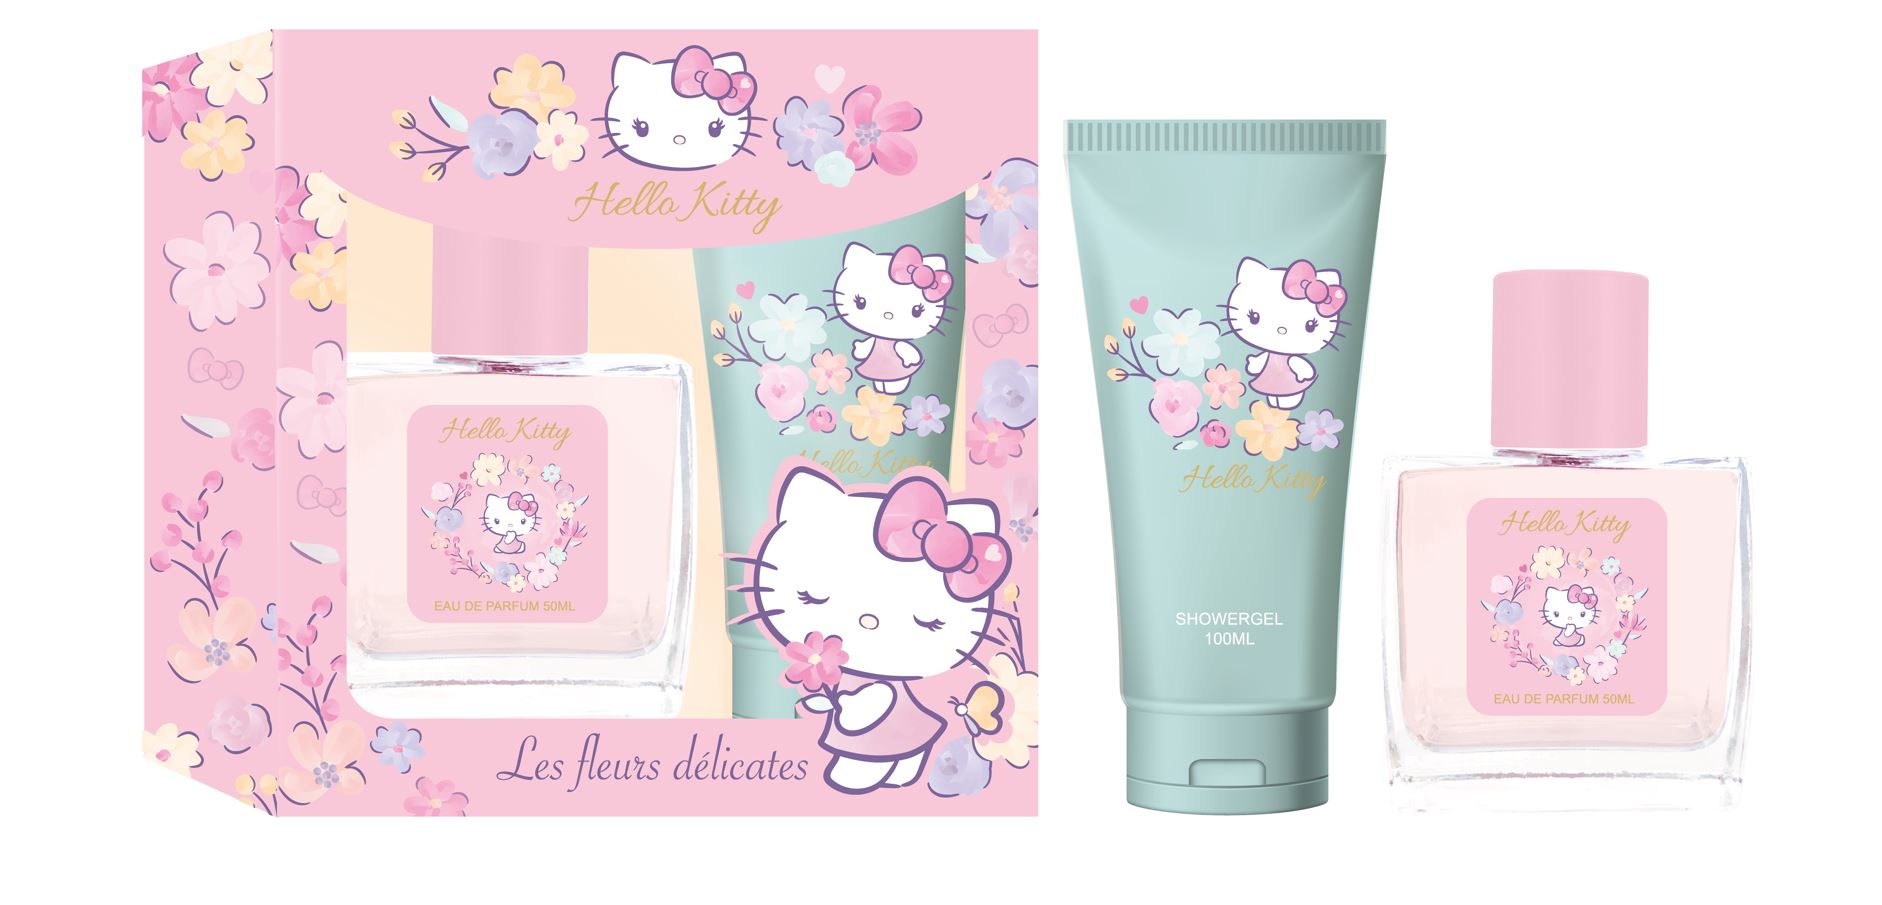 Featured image for “Hello Kitty Giftset 03”